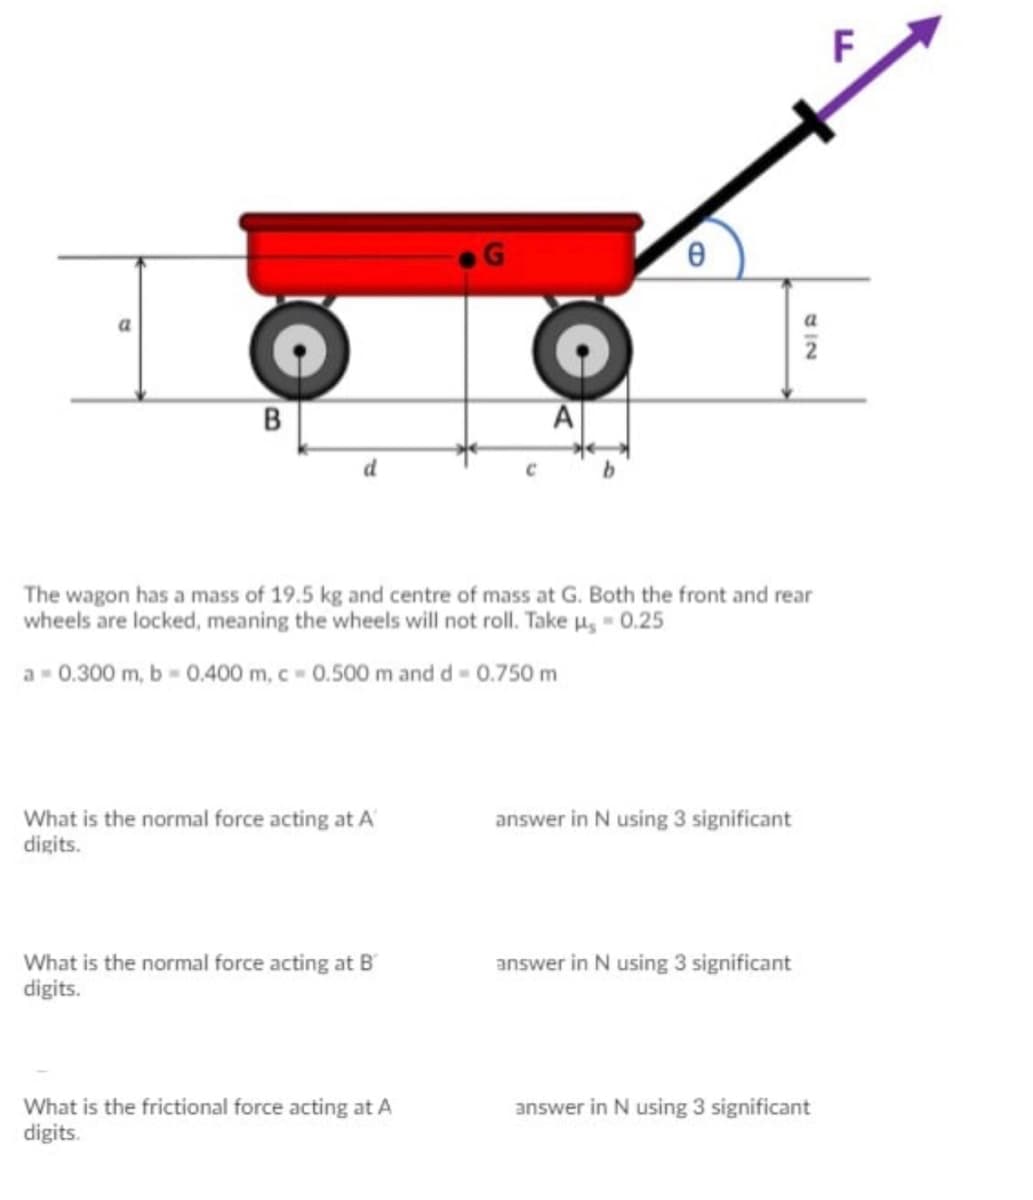 F
A
The wagon has a mass of 19.5 kg and centre of mass at G. Both the front and rear
wheels are locked, meaning the wheels will not roll. Take u, - 0.25
a- 0.300 m, b - 0.400 m, c - 0.500 m and d 0.750 m
What is the normal force acting at A
digits.
answer in N using 3 significant
What is the normal force acting at B
digits.
answer in N using 3 significant
What is the frictional force acting at A
digits.
answer in N using 3 significant
